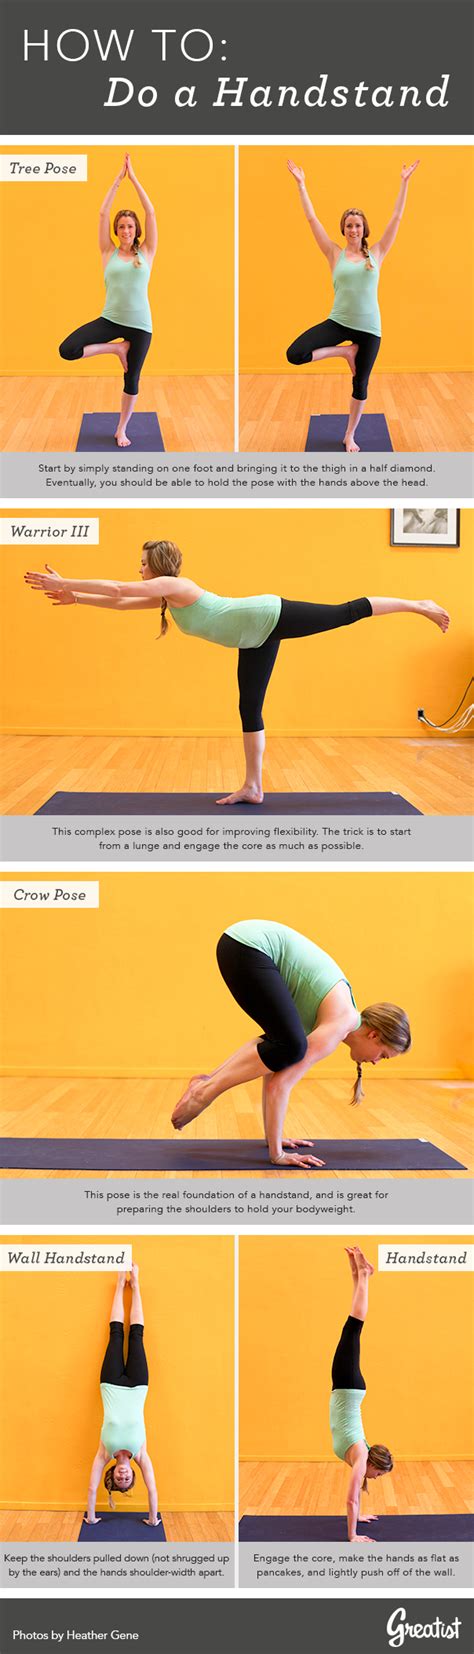 How To Do A Handstand Pictures Photos And Images For